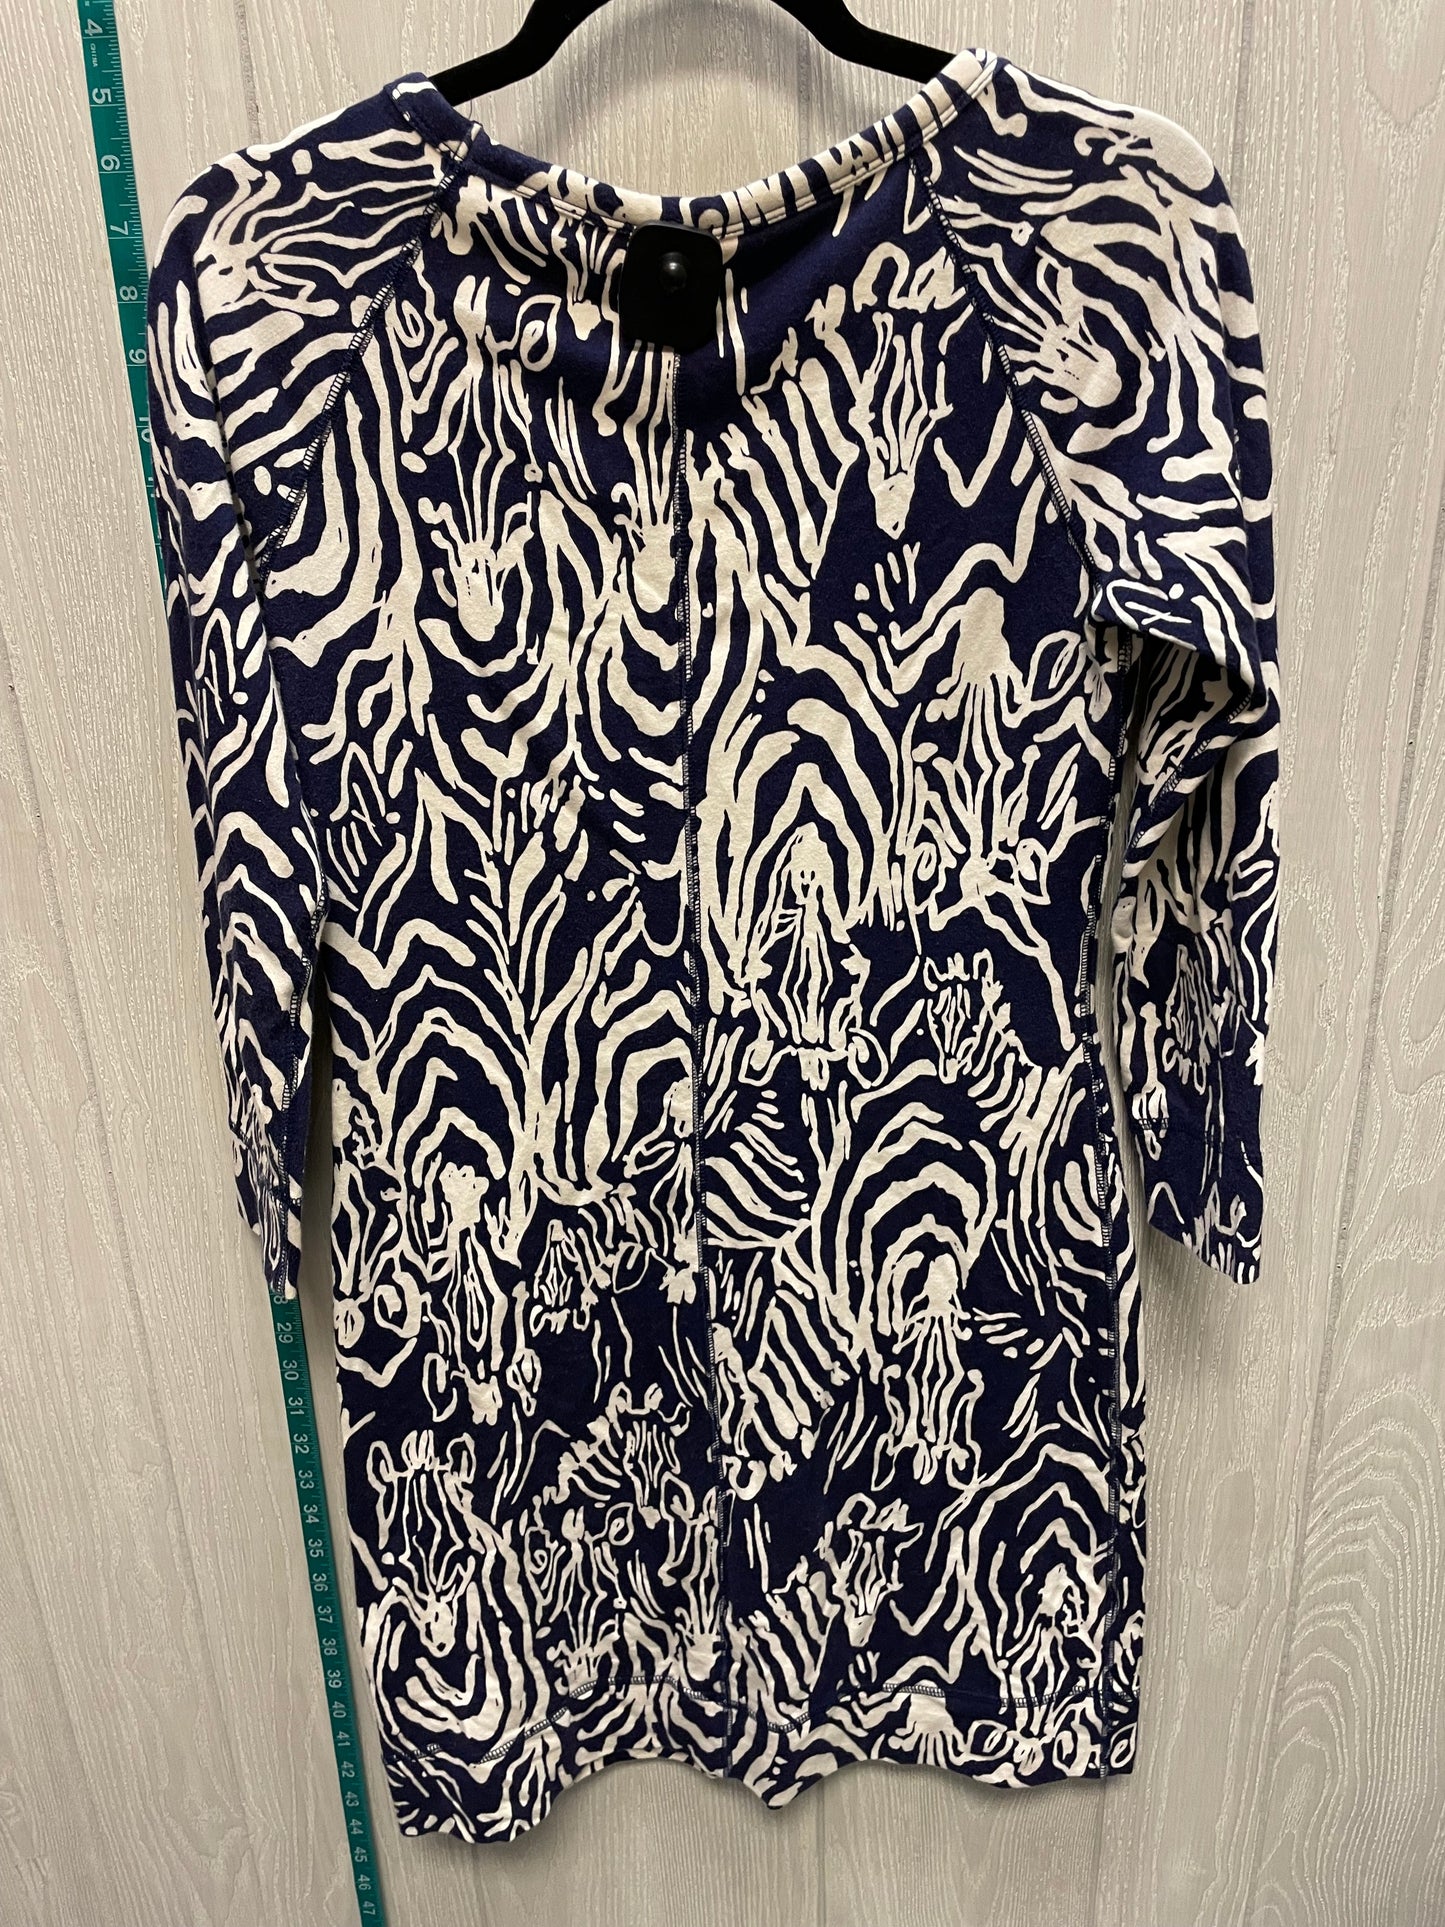 Blue & White Dress Casual Short Lilly Pulitzer, Size S